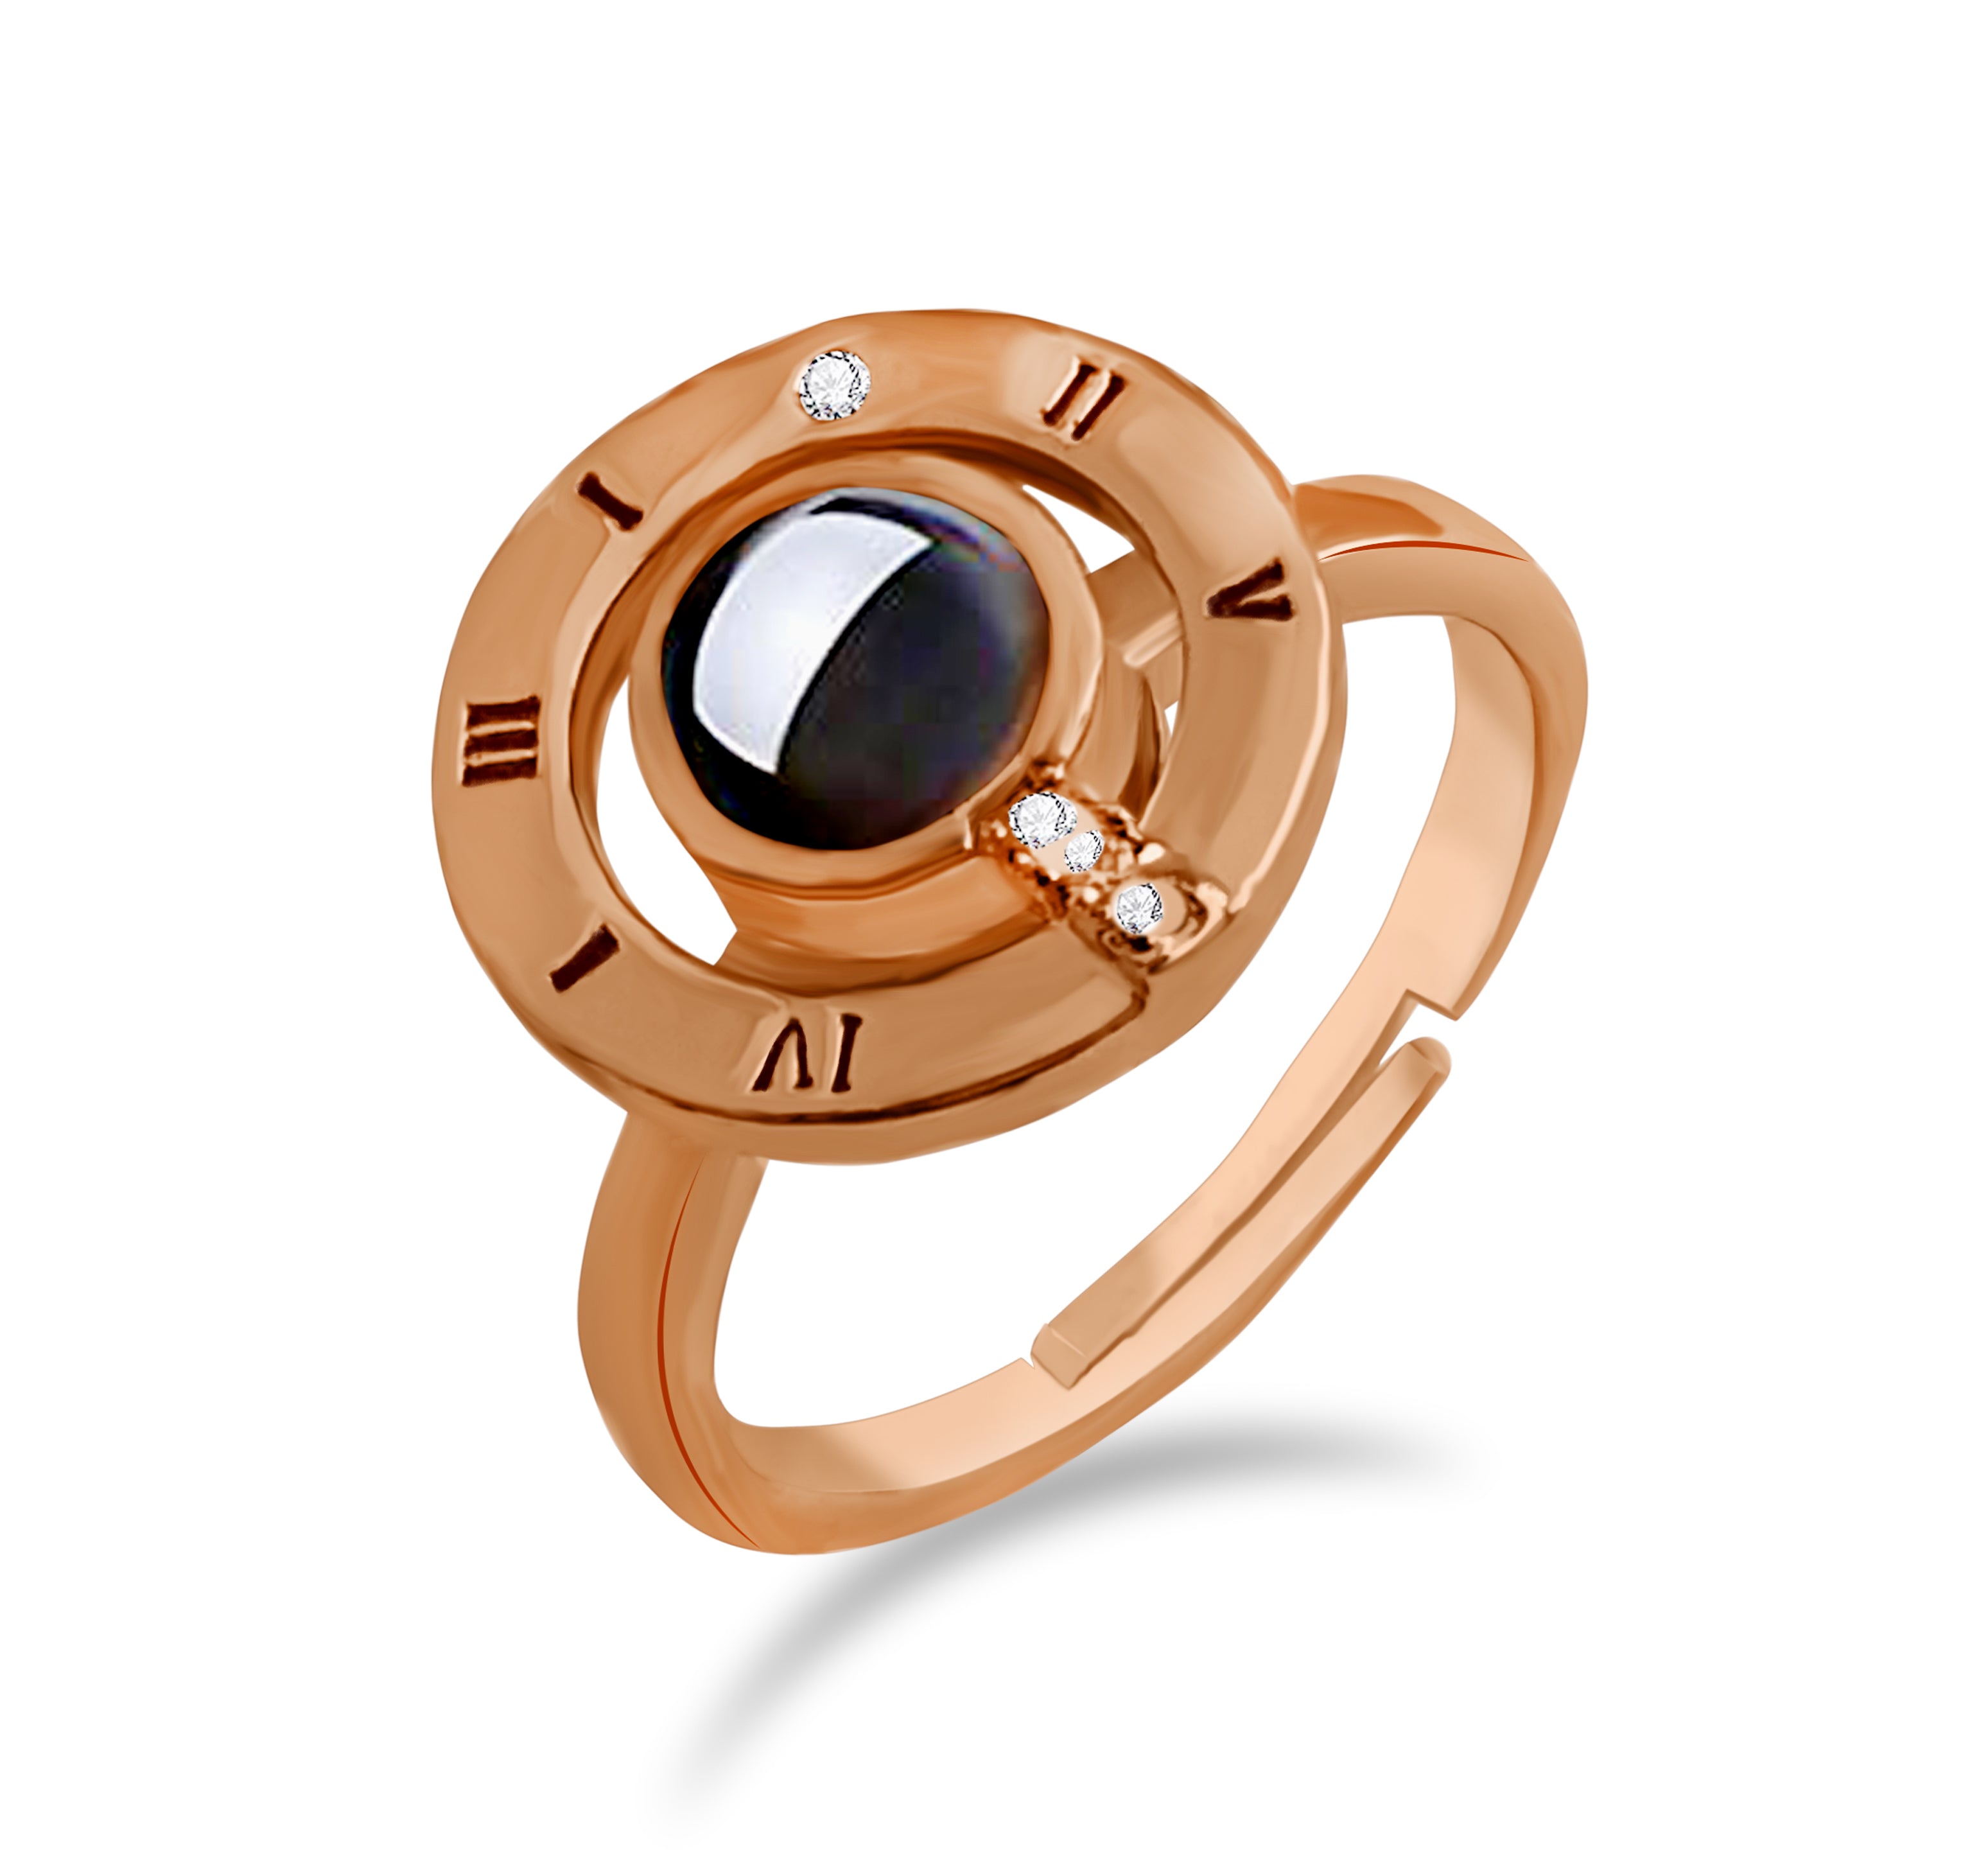 Urbana Copper Plated single Adjustable Ring Reflecting I love you In 100 Languages